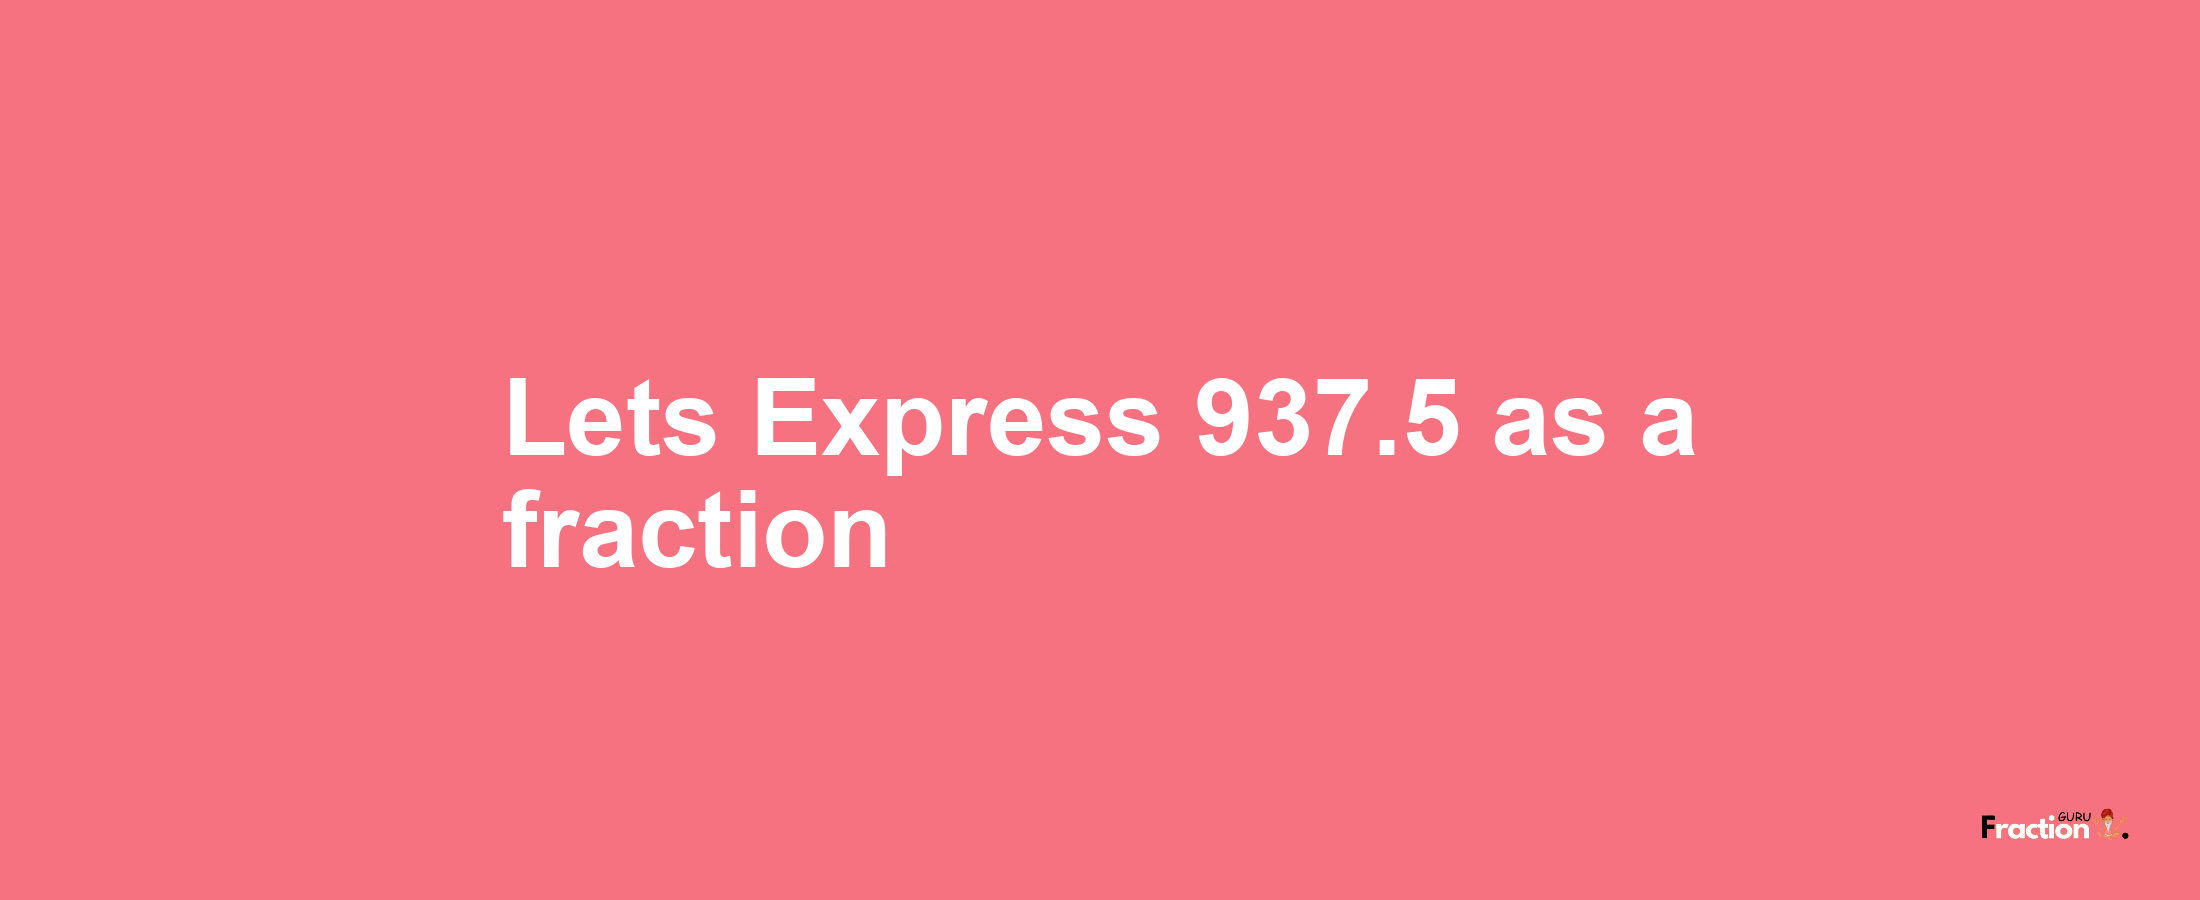 Lets Express 937.5 as afraction